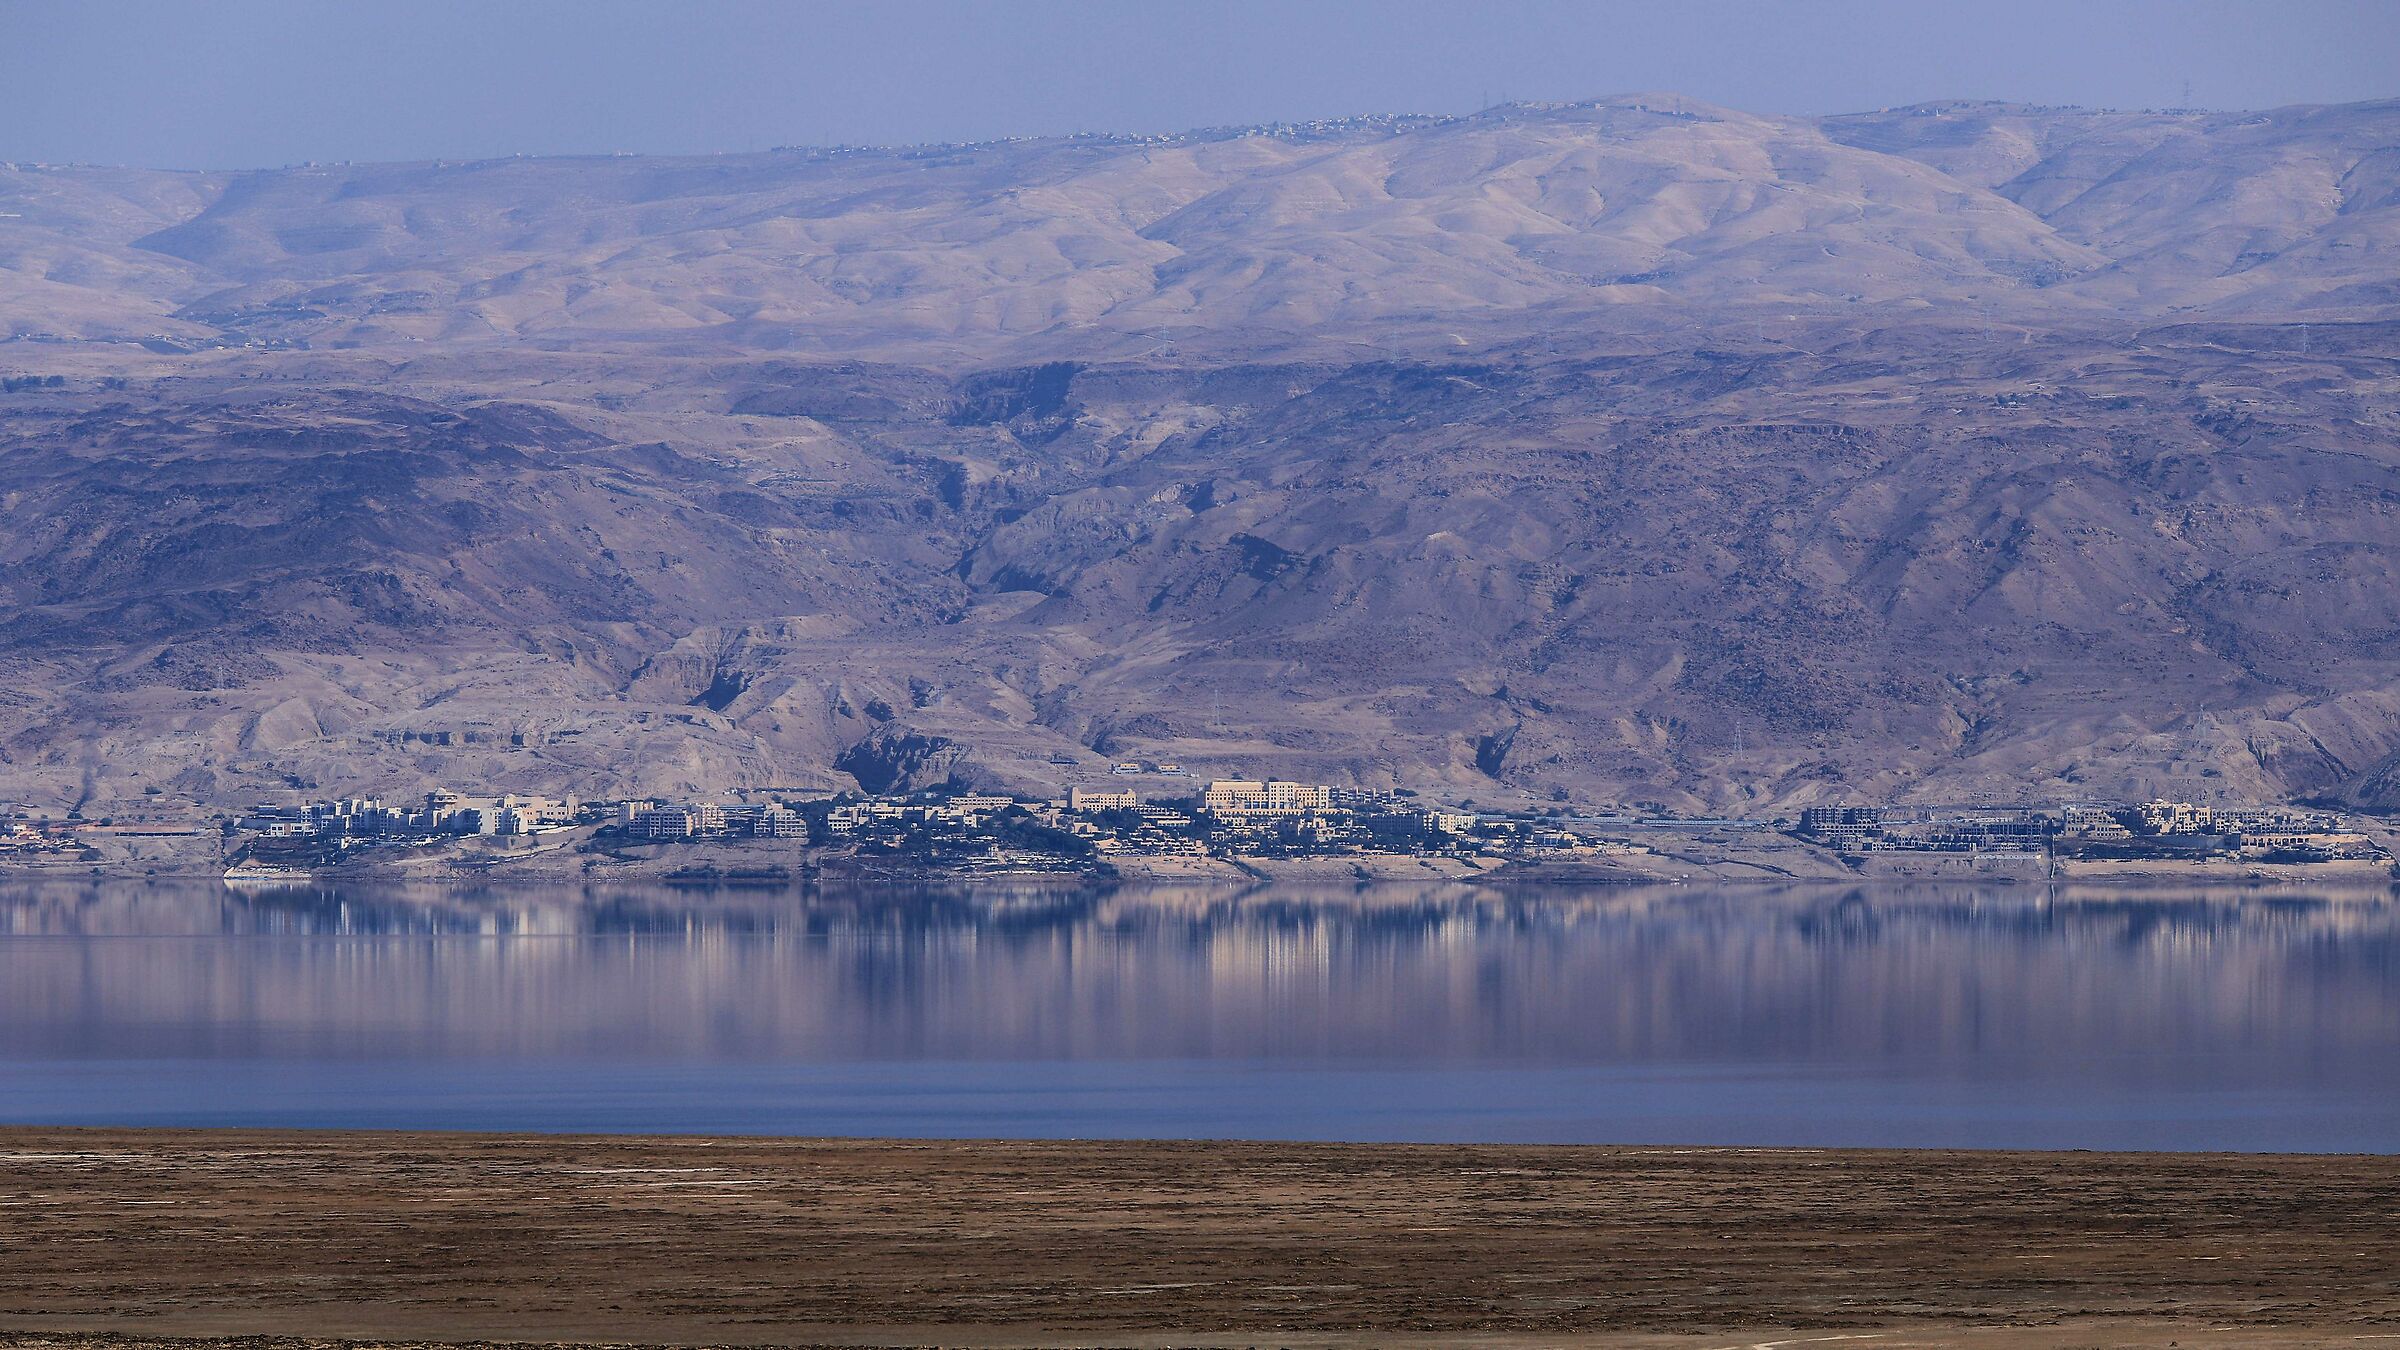 Jordanian Villages and Dead Sea Seen from Israel...